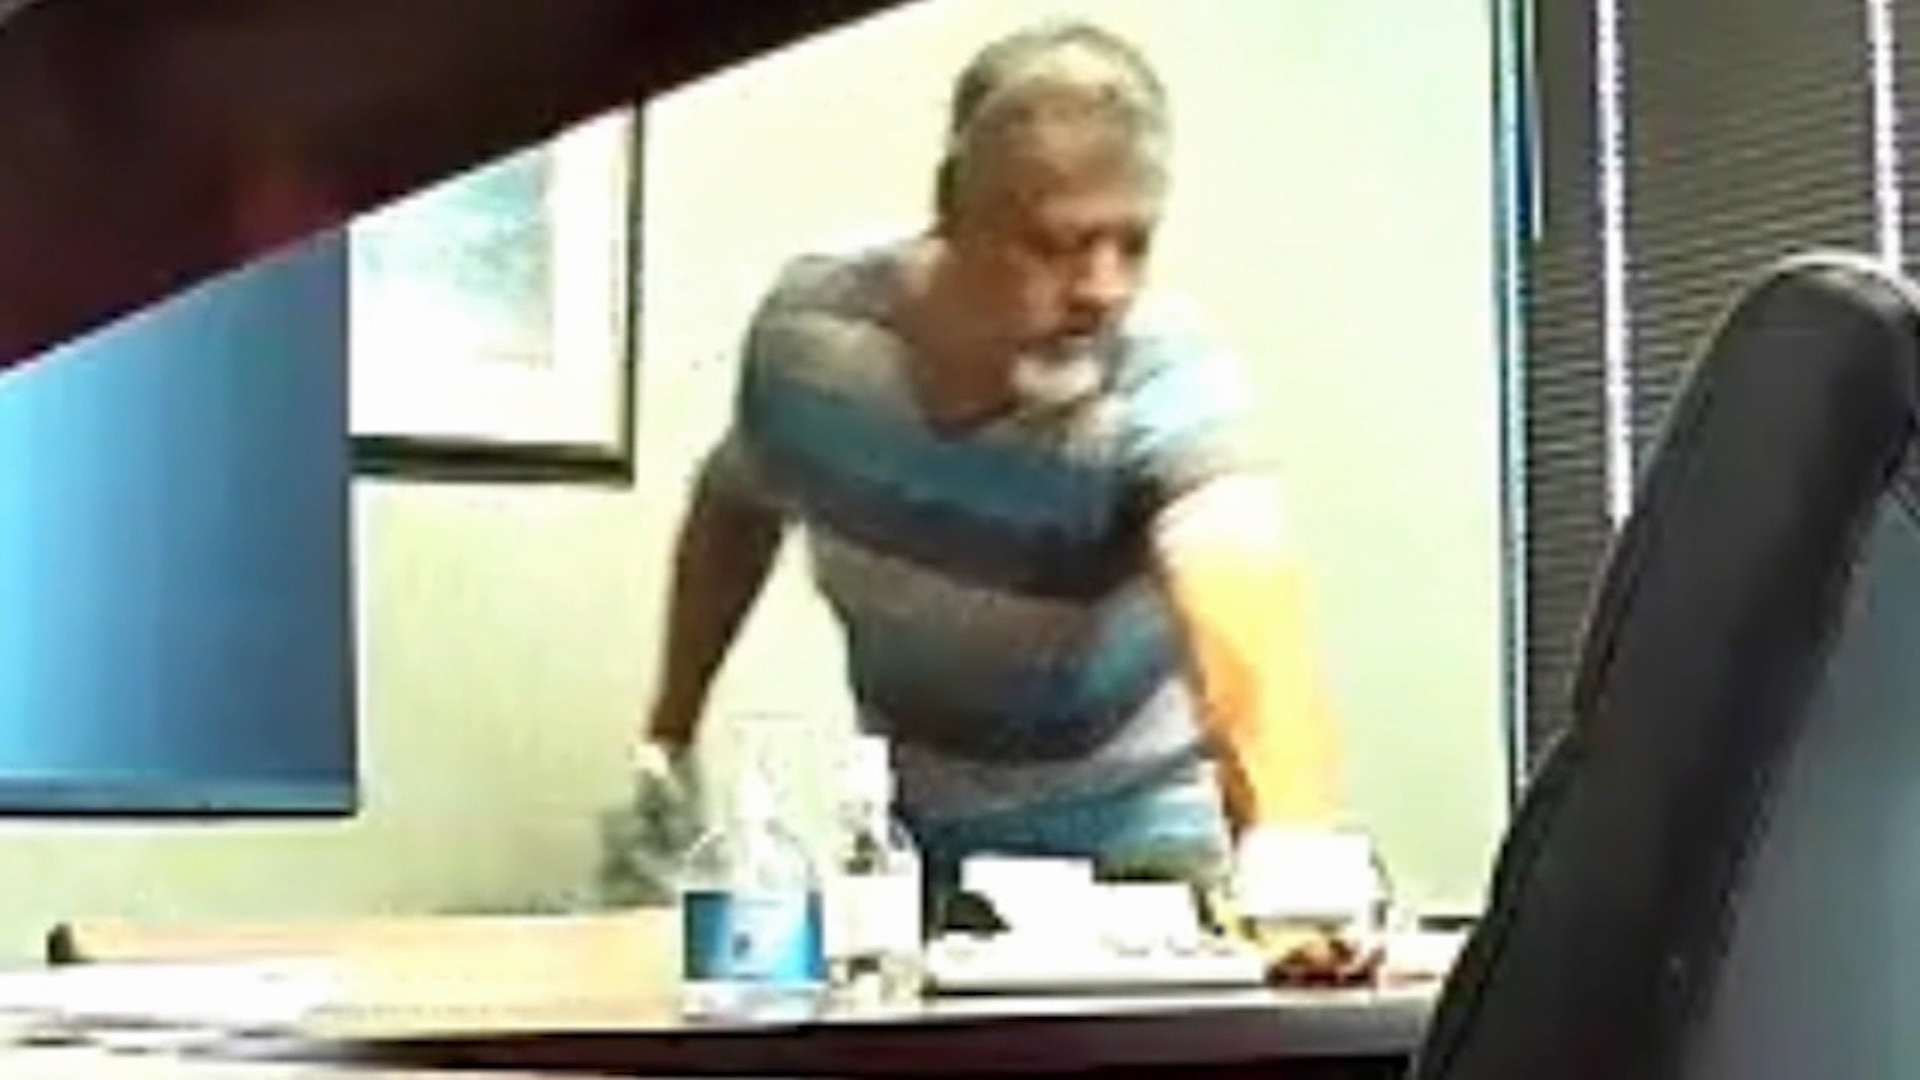 A secret camera allegedly caught the janitor in the act